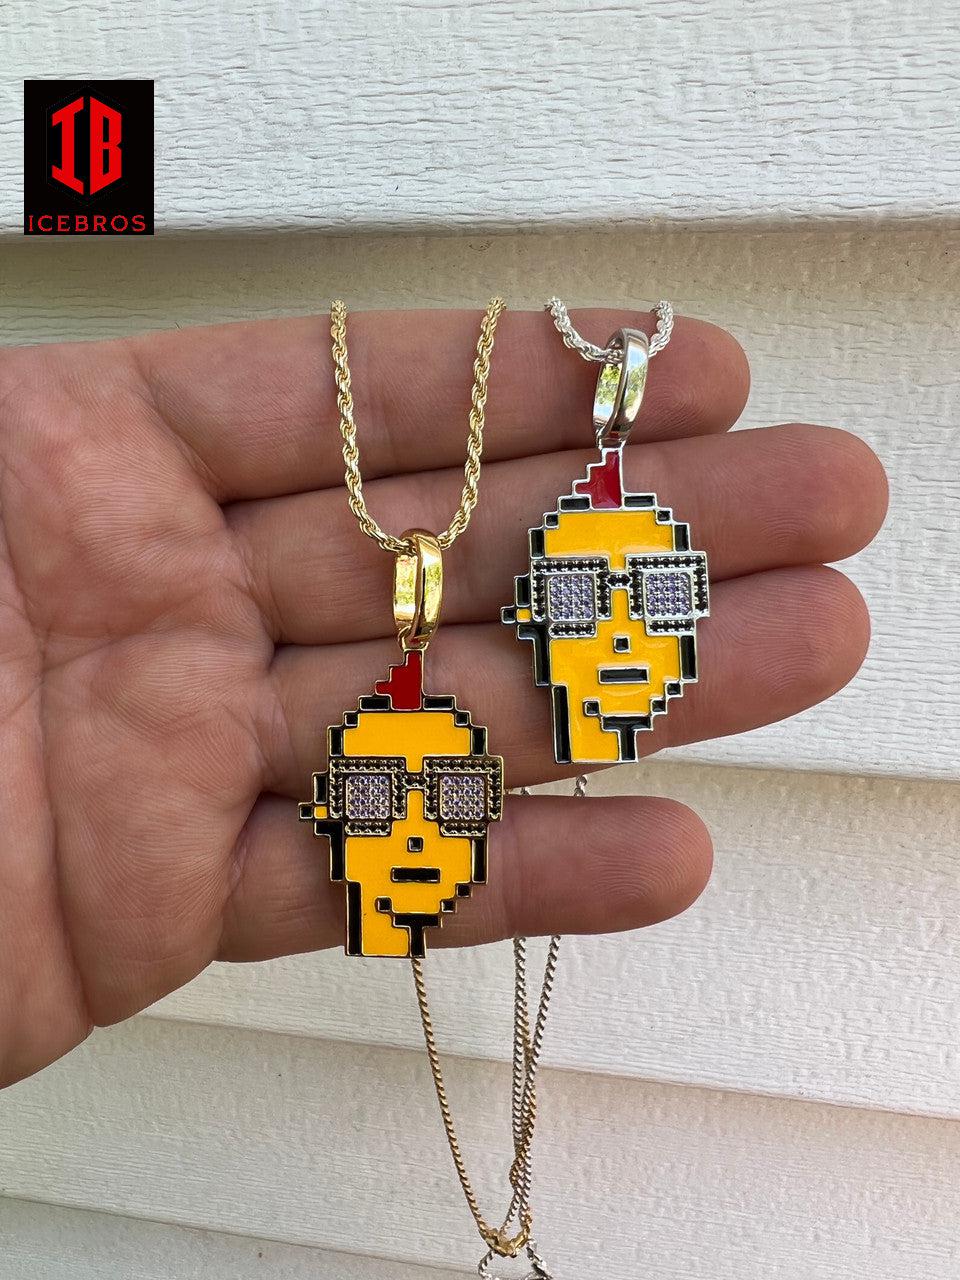 Cryptopunk NFT Pendant #1 Guy Glasses Iced Pendant Necklace Solid 925 Silver 14k Gold Crypto Punk